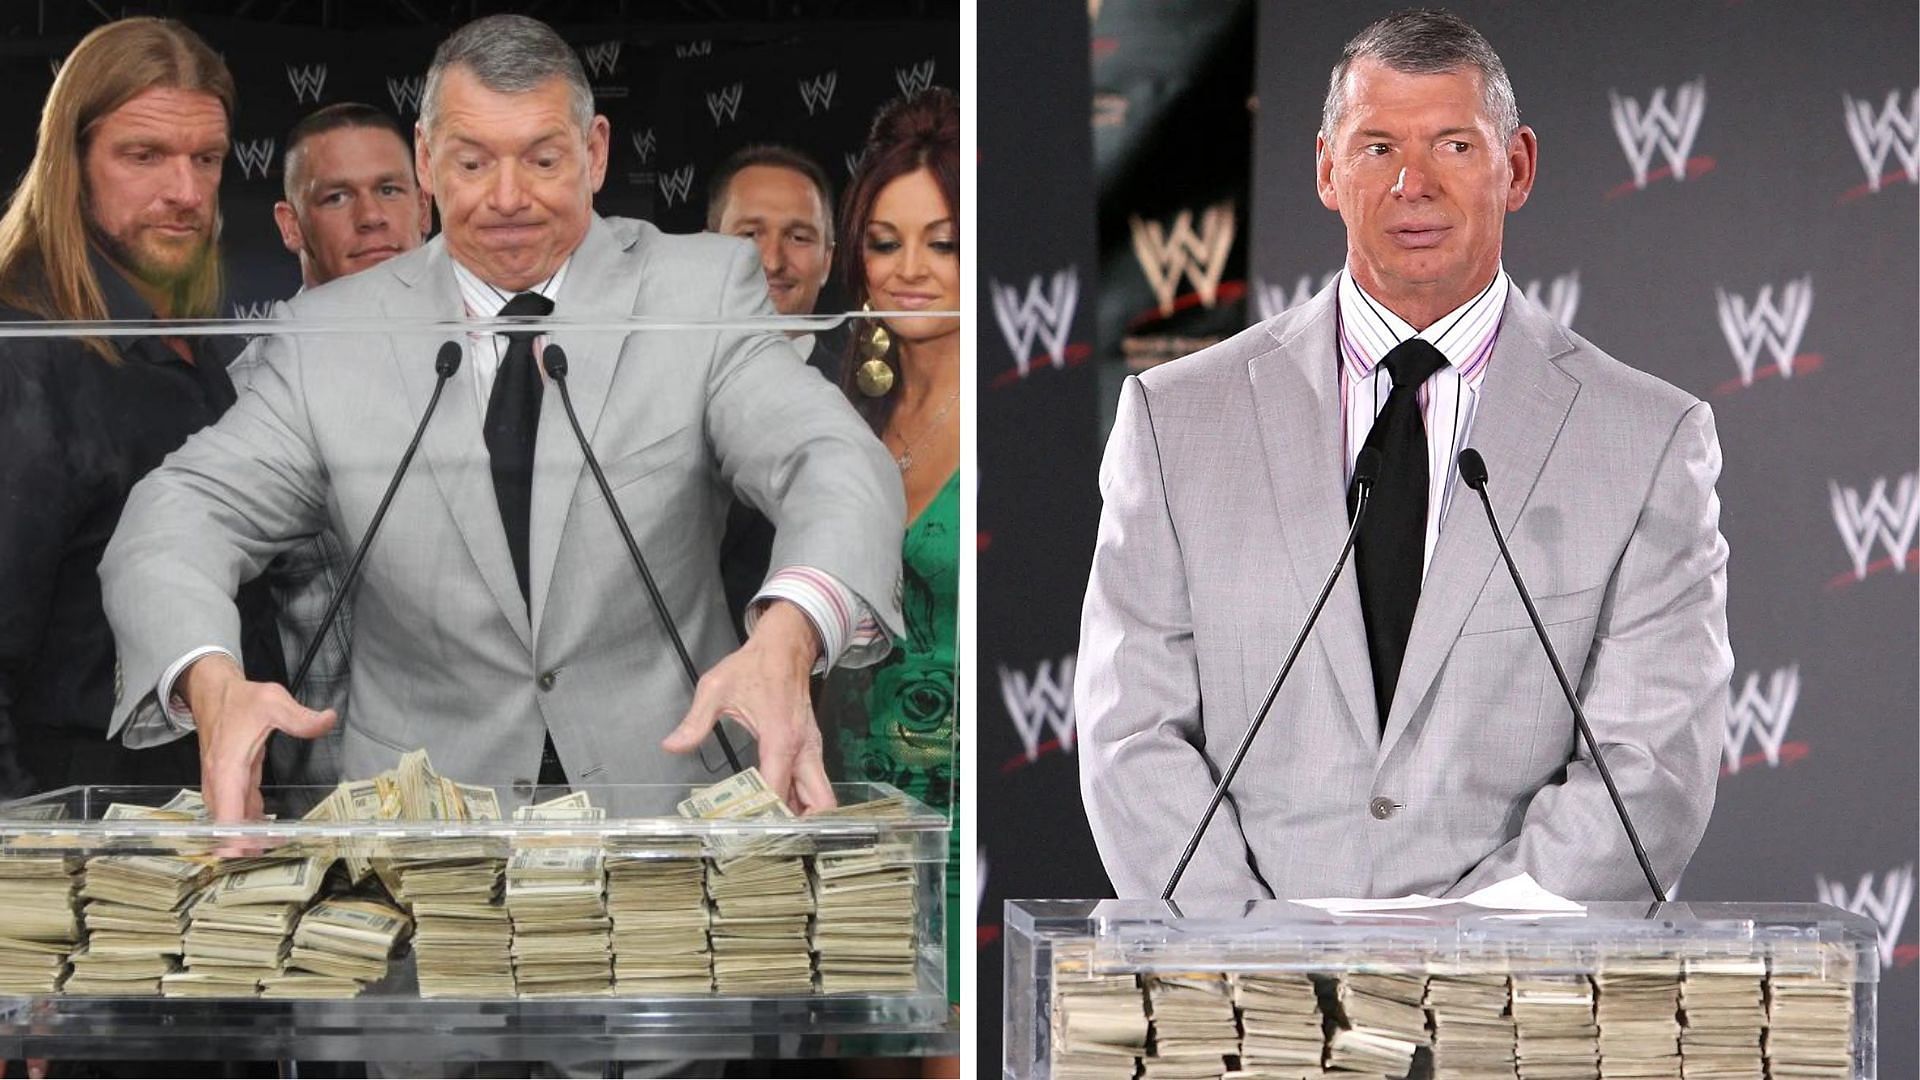 WWE is rumored to up for sale following Vince McMahon